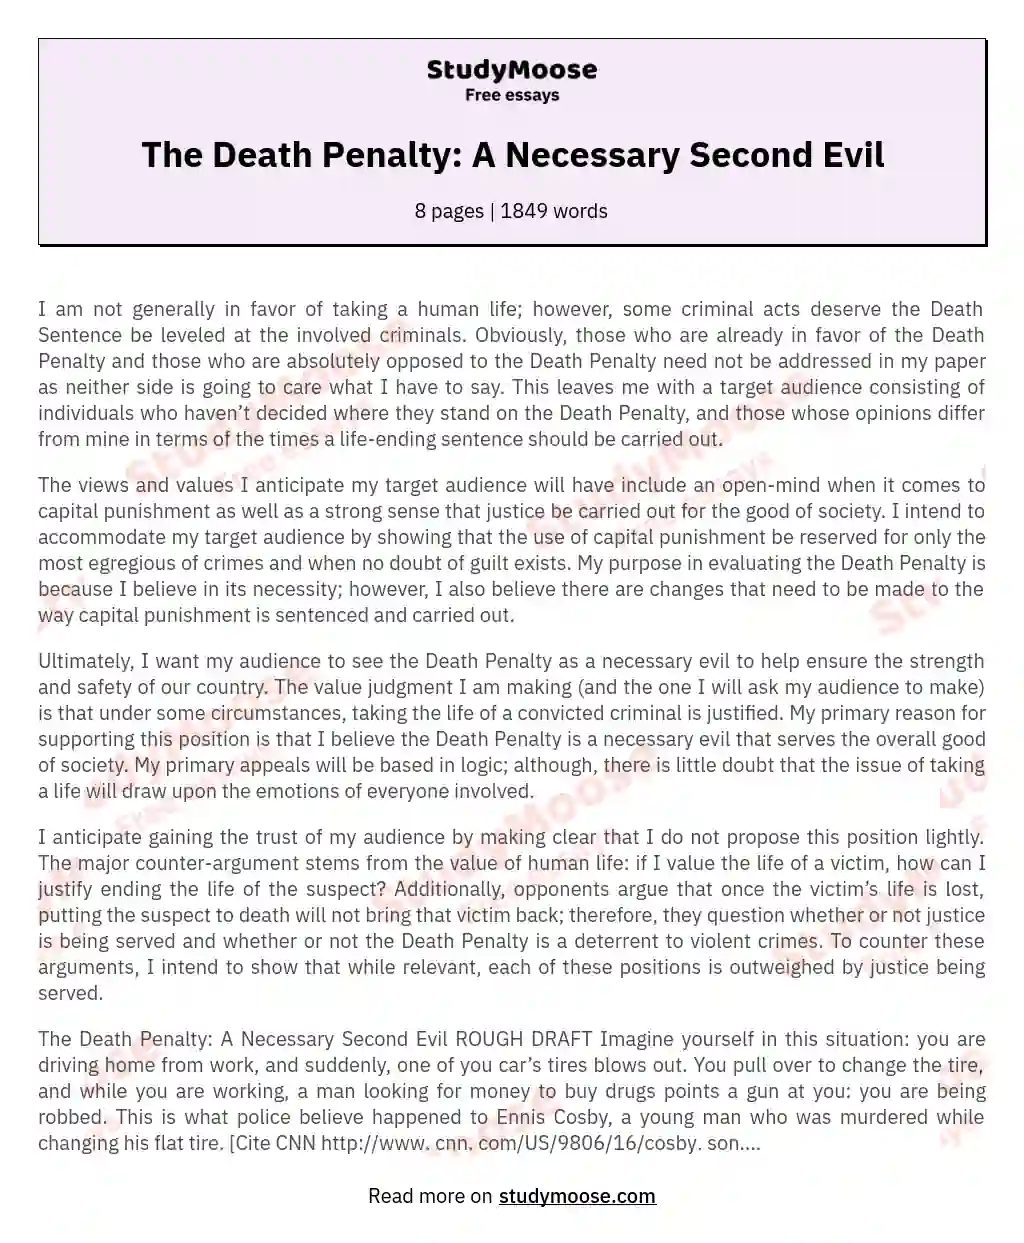 The Death Penalty: A Necessary Second Evil